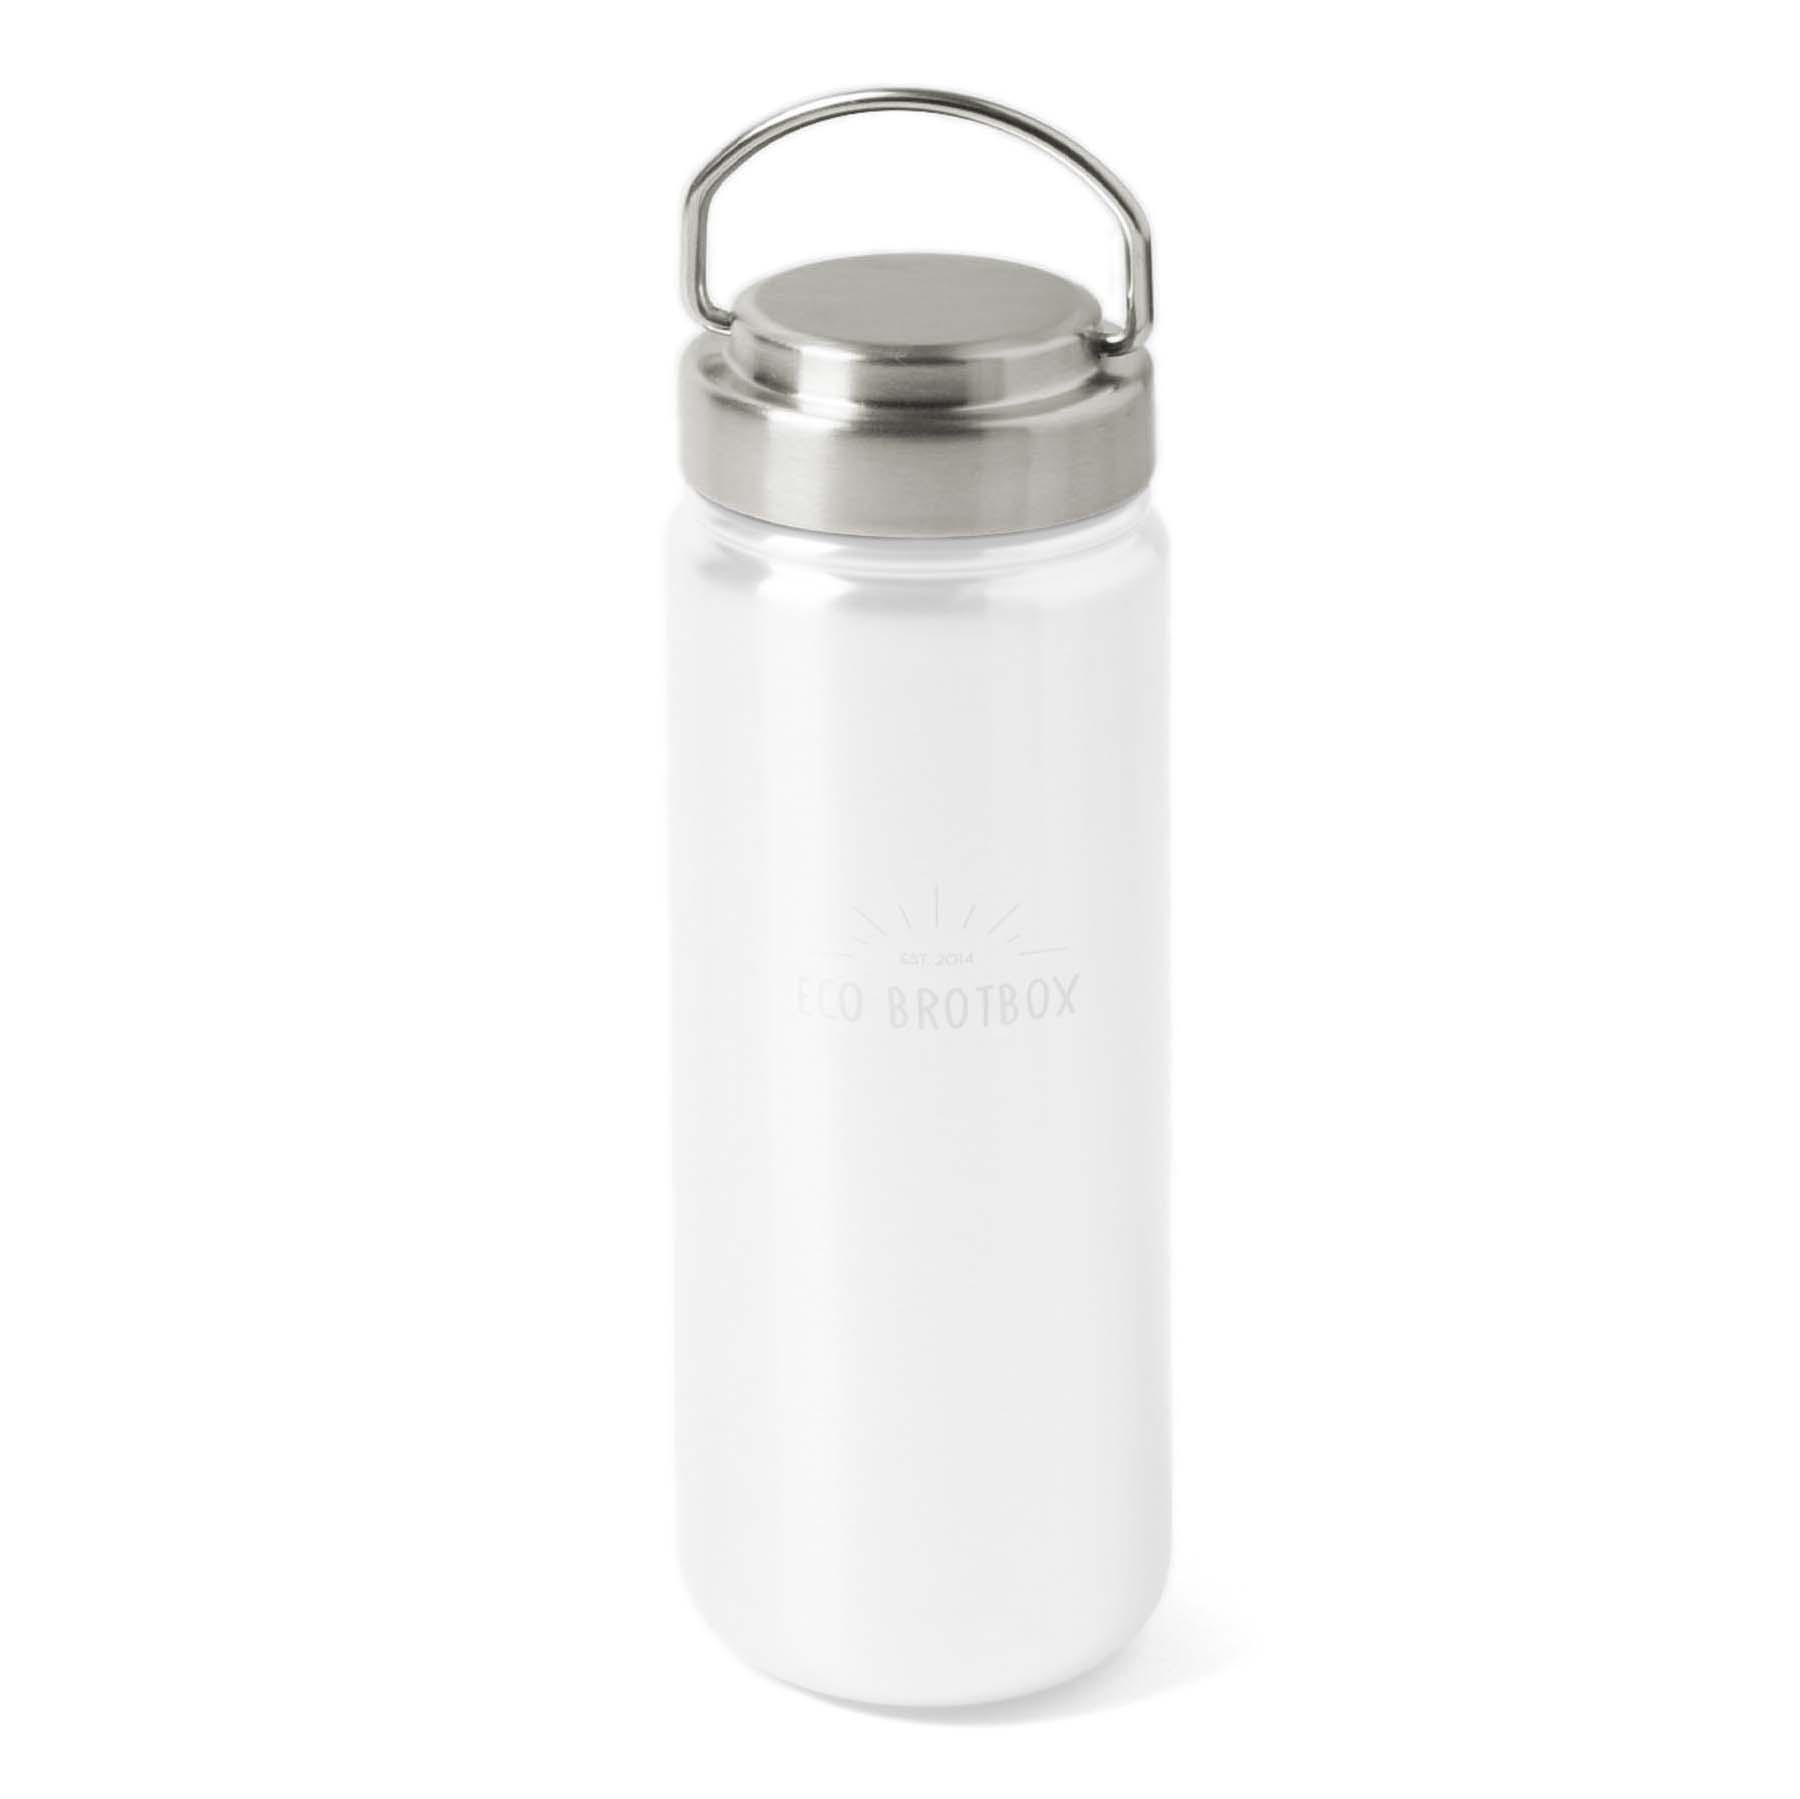 Screw cap (V3) for drinking and insulated bottles